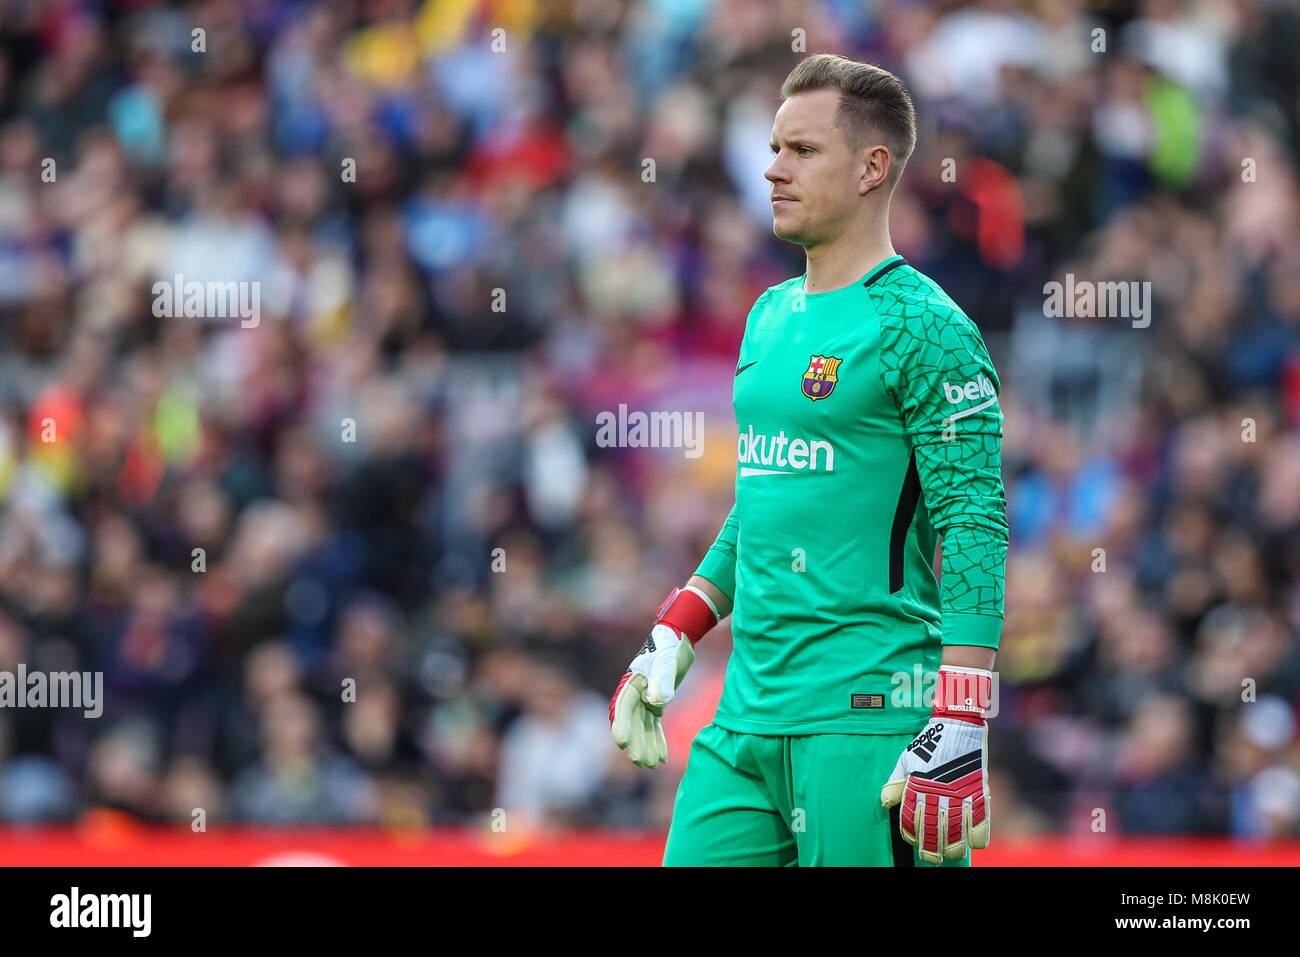 18th March 2018 Marc-Andre ter Stegen goalkeeper of FC Barcelona during the 2017/2018 LaLiga Santander Round 29 game between FC Barcelona and Athletic Bilbao at Camp Nou on March 19, 2018 in Barcelona, Spain. (Photo by Ukko Images / Pacific Press) Stock Photo